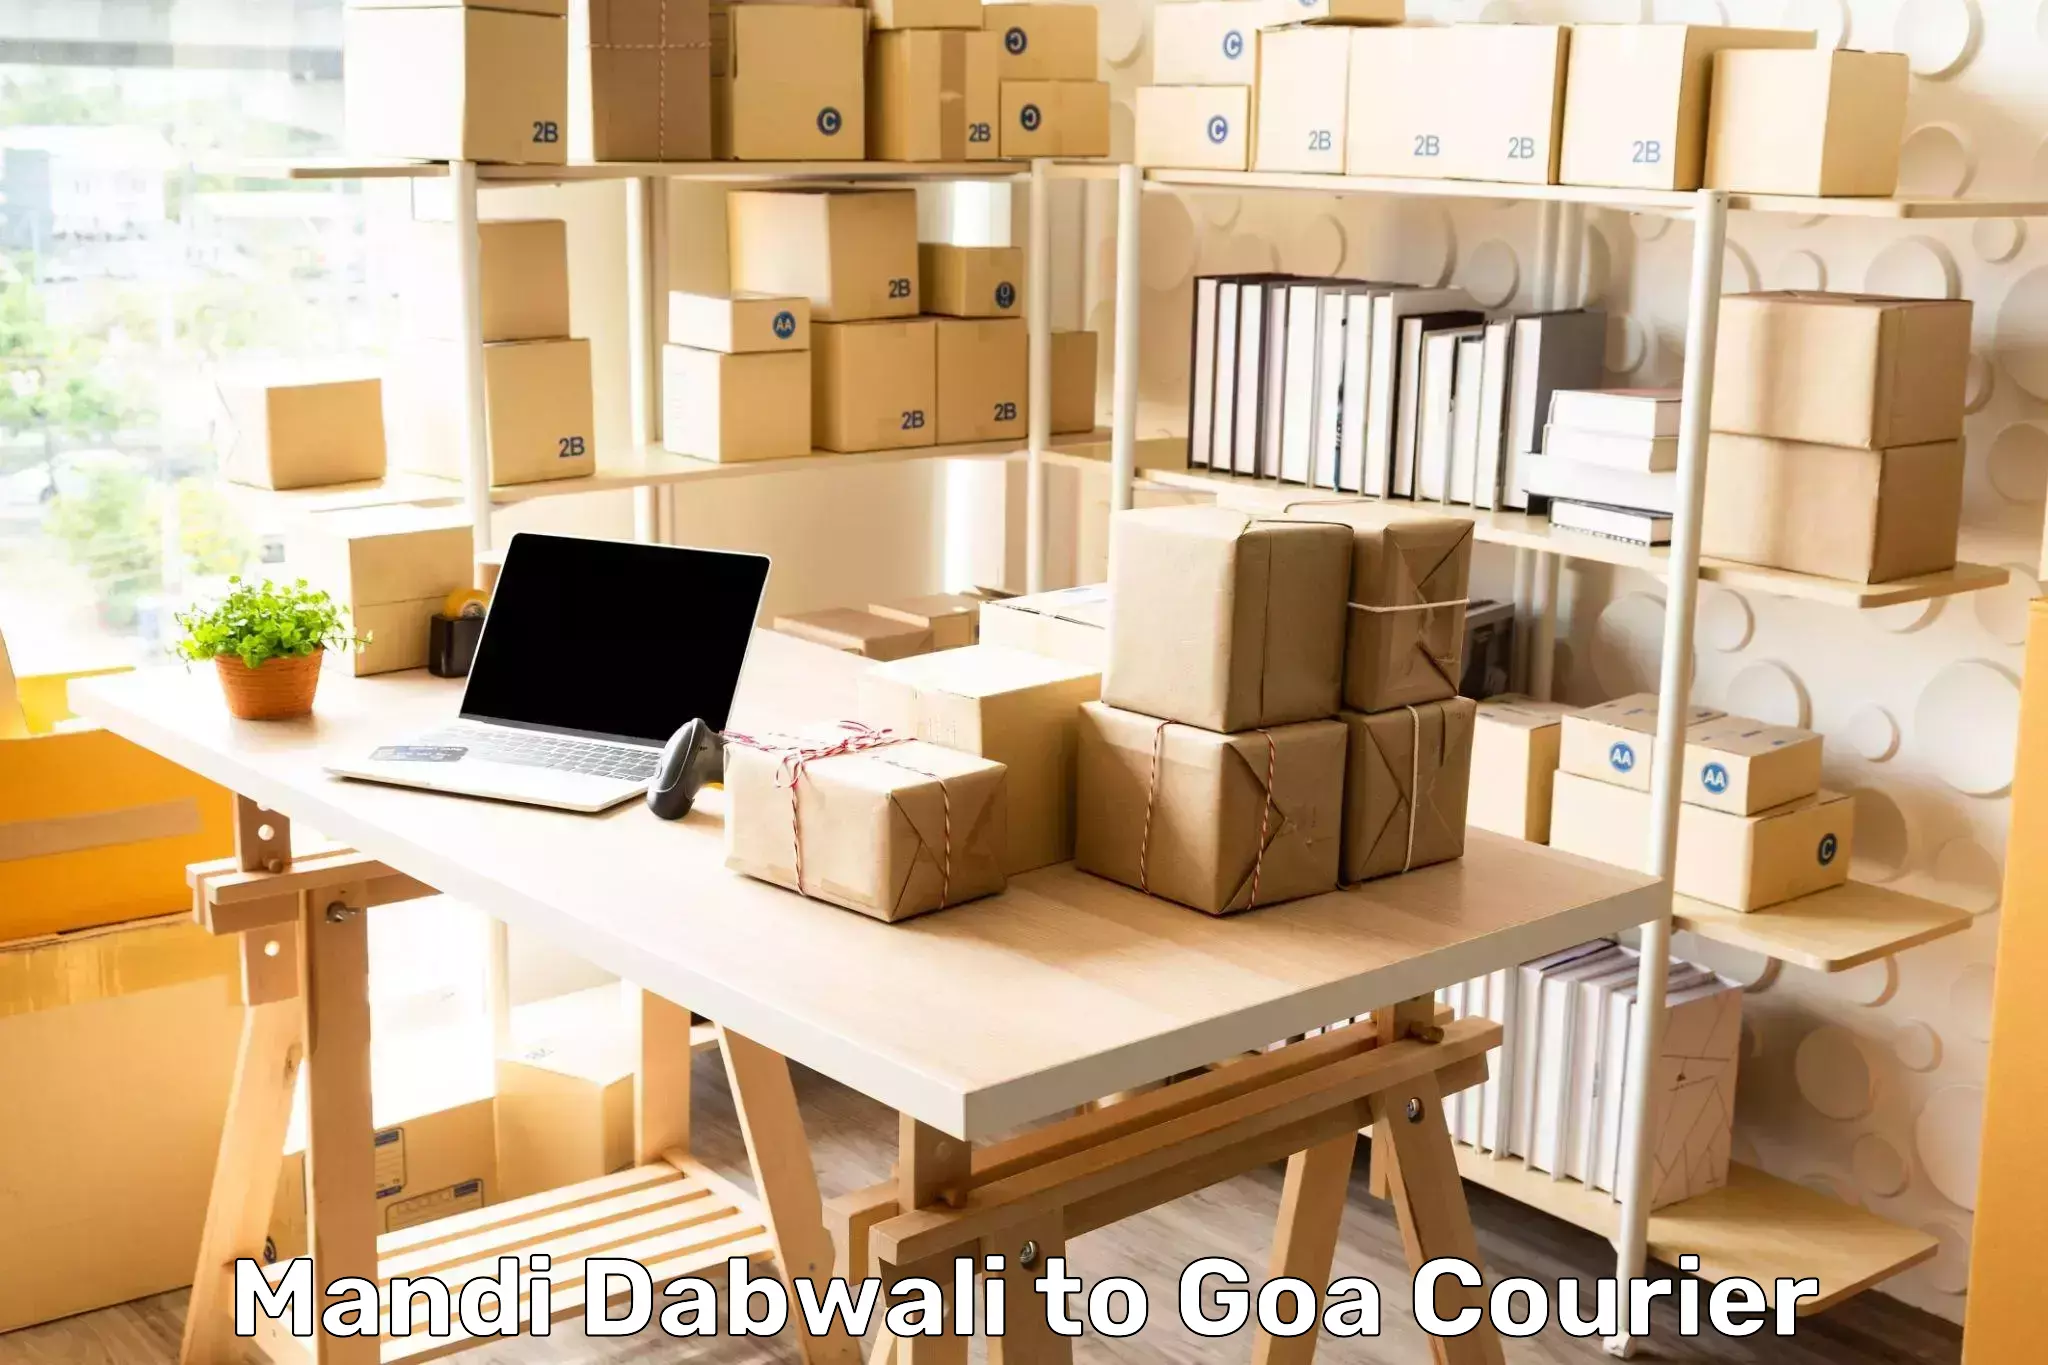 Overnight delivery services Mandi Dabwali to IIT Goa